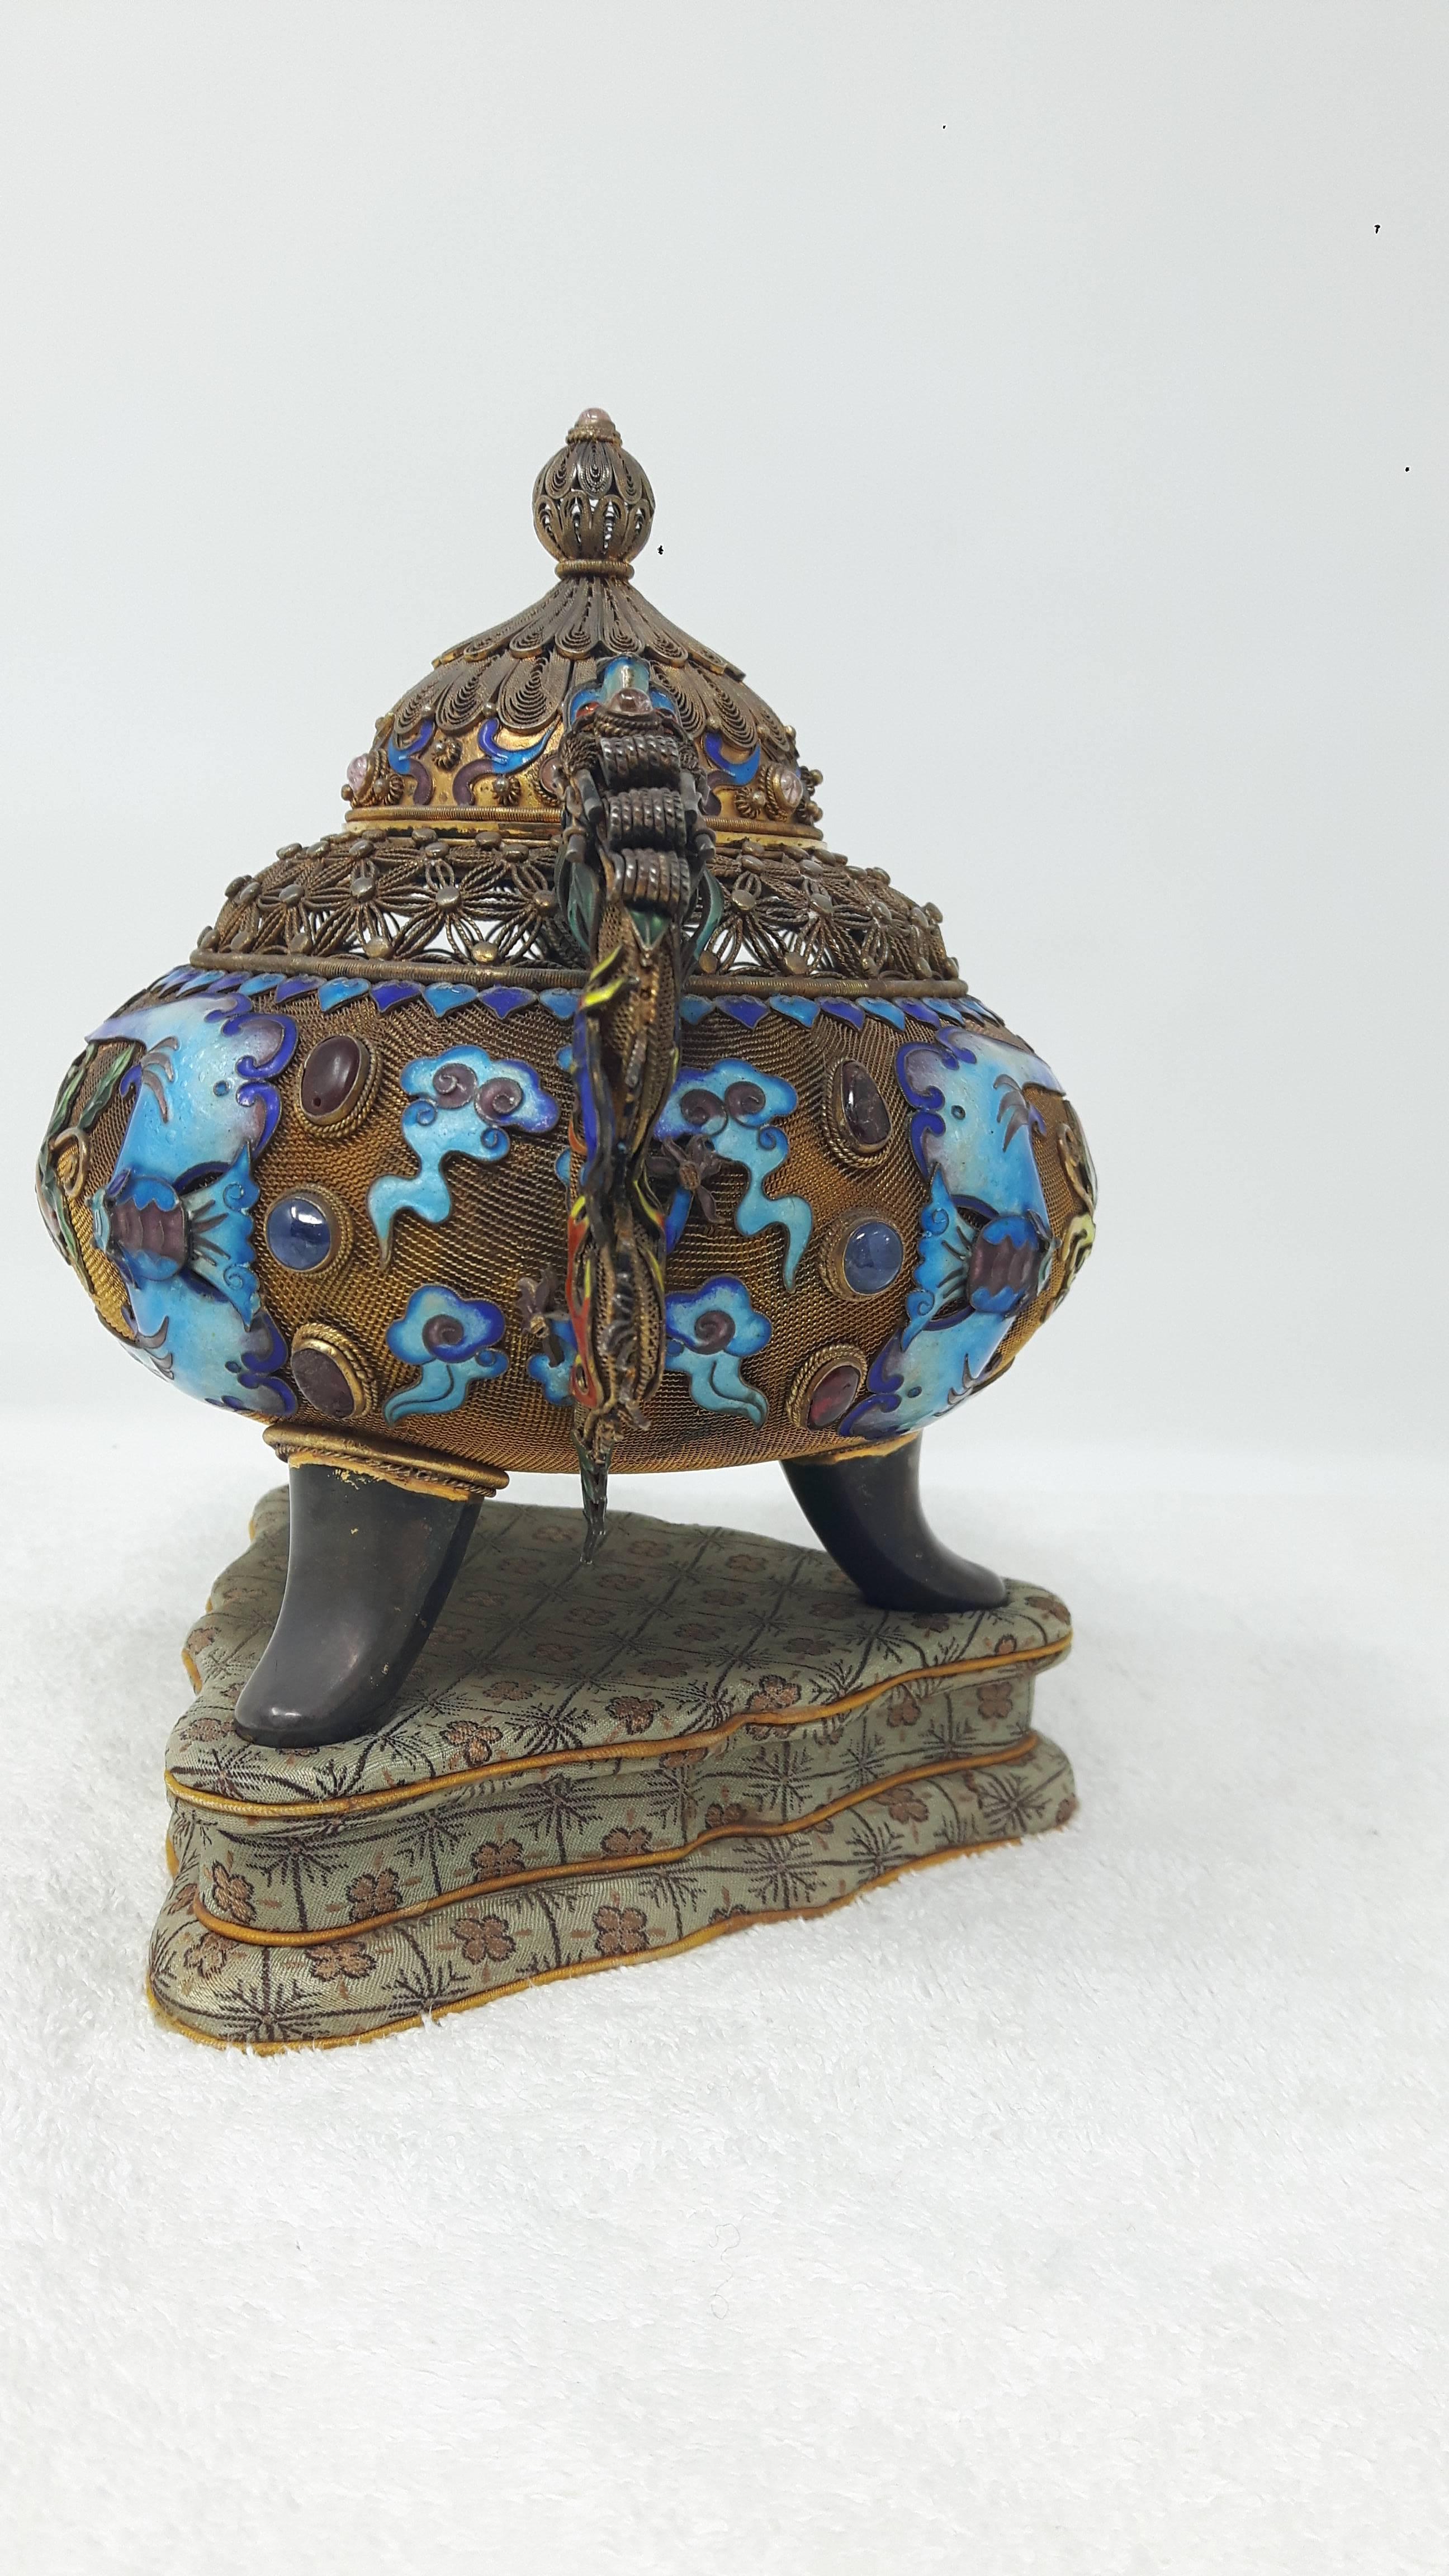 Hand-Crafted Gilt Filigree and Enamel Incense Burner and Cover